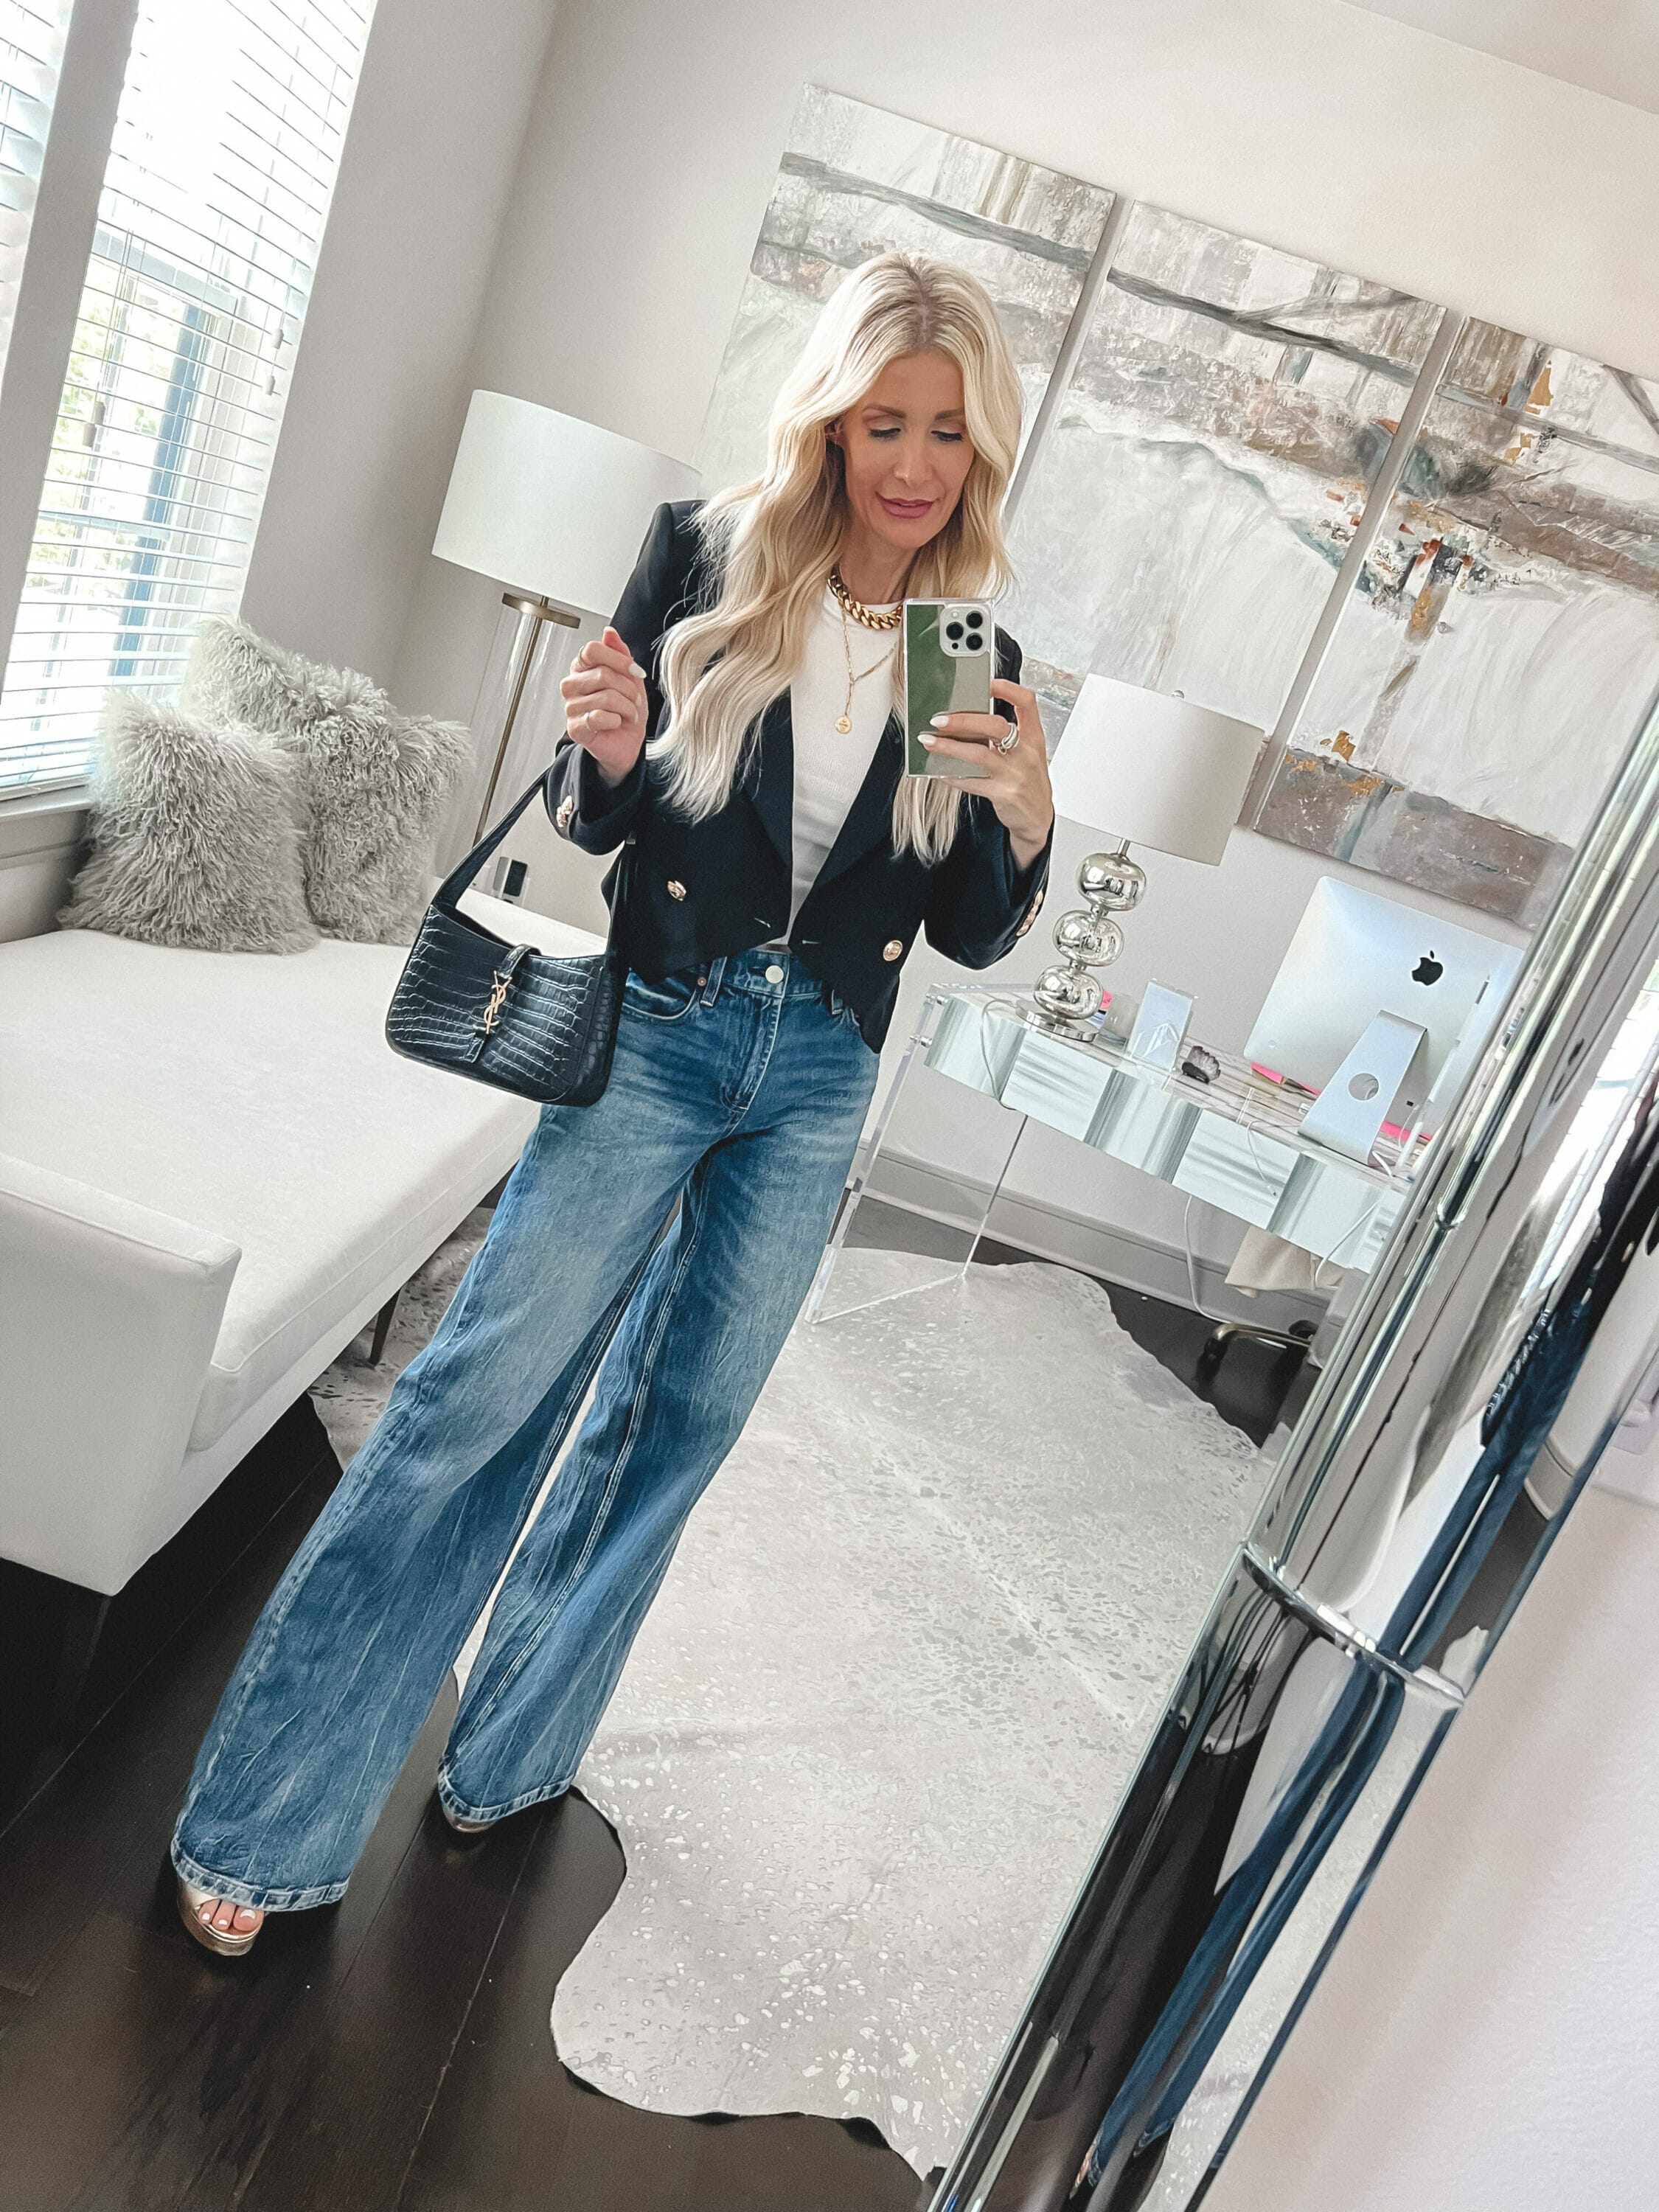 Over 40 fashion influencer wearing baggy jeans with a simple white tee and cropped blazer as one of fall's hottest denim trends.